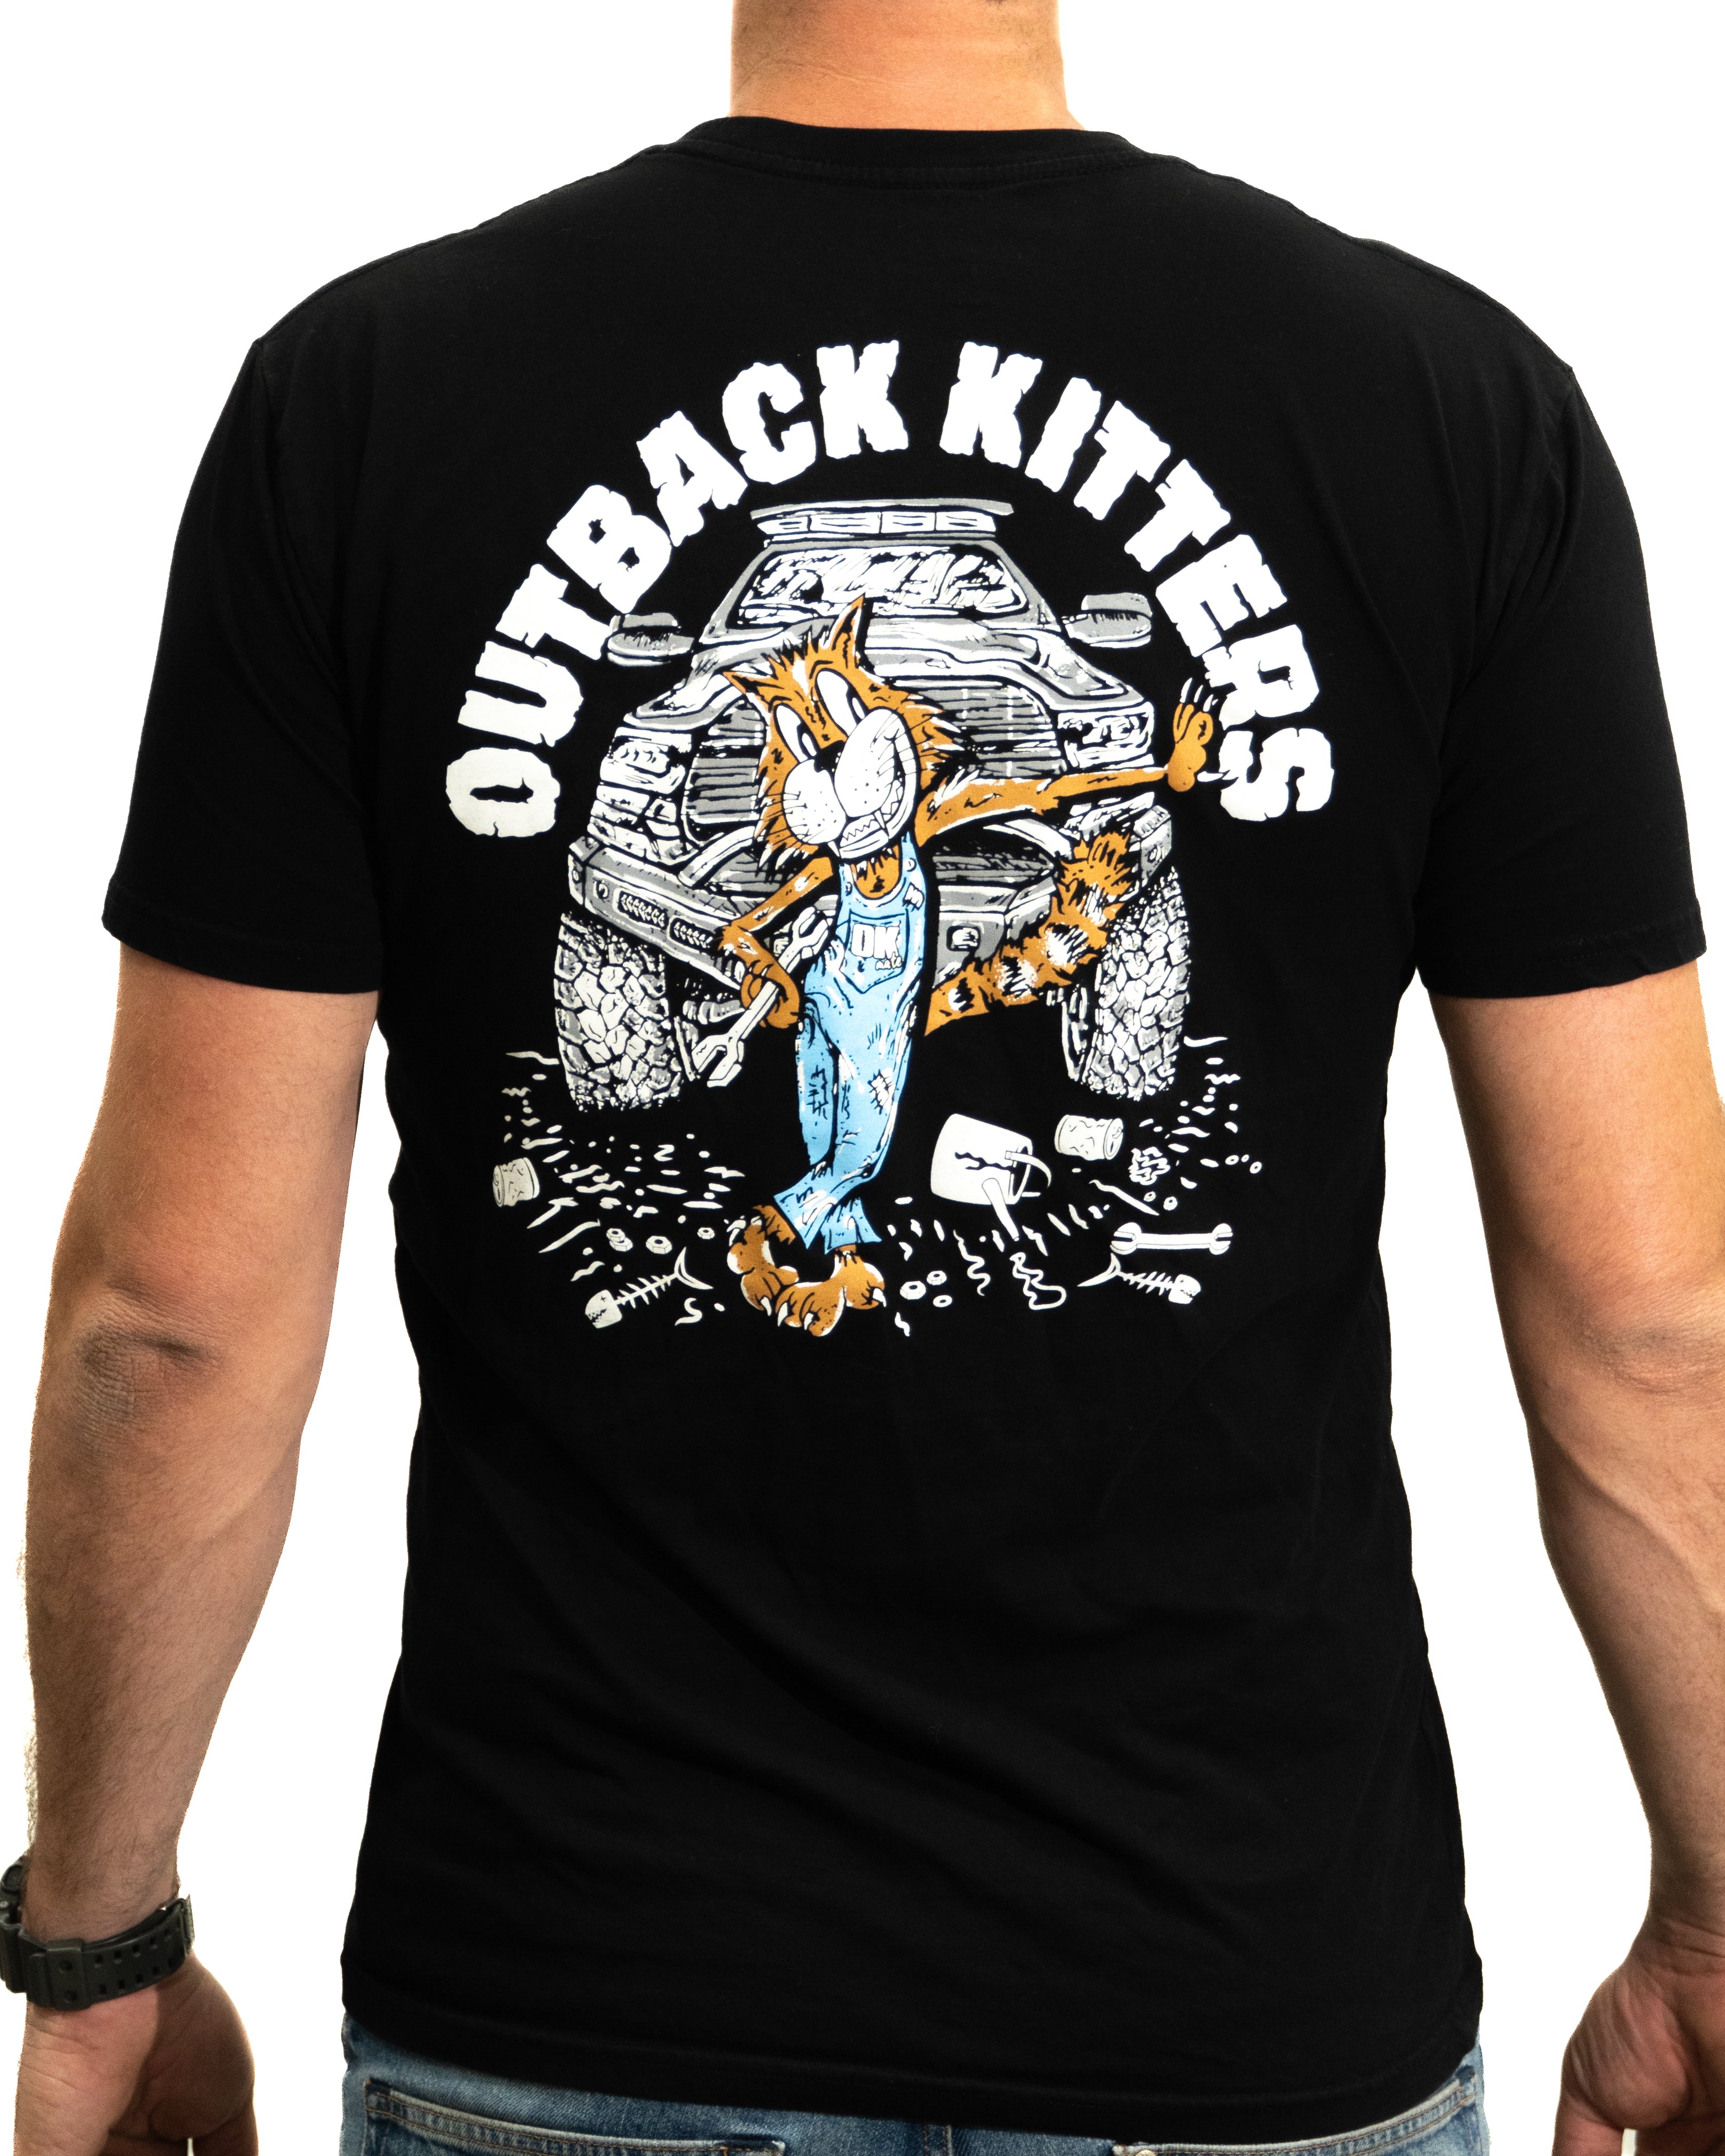 Outback Kitters "Mecatnic" T-Shirt - Outback Kitters